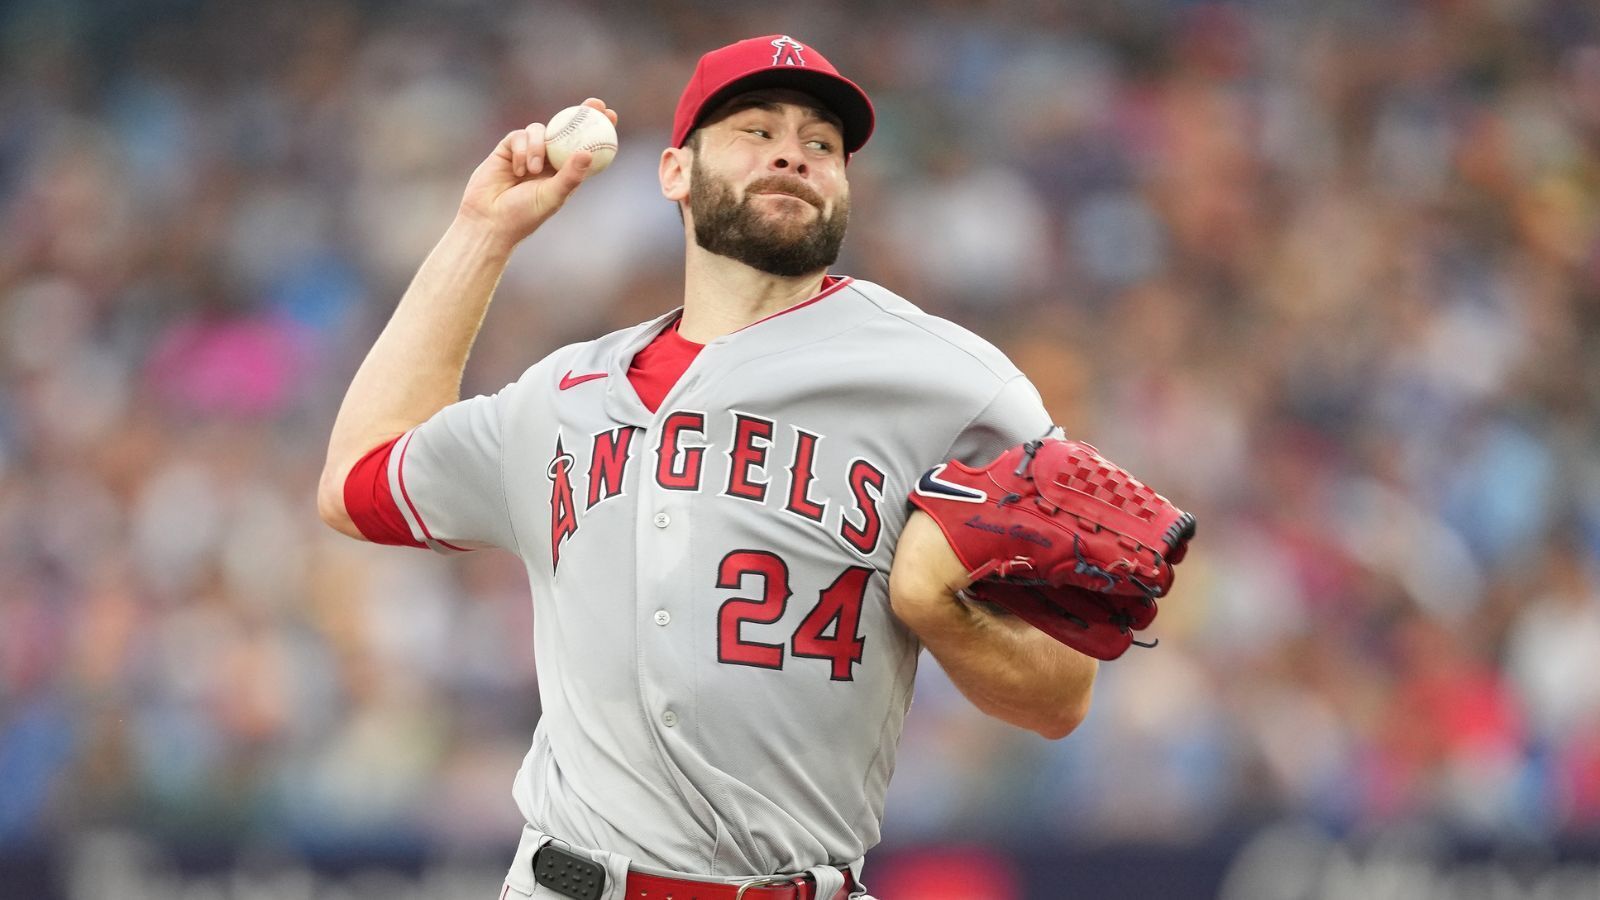 Braves Light Up Lucas Giolito In 2nd Rough Start For Angels